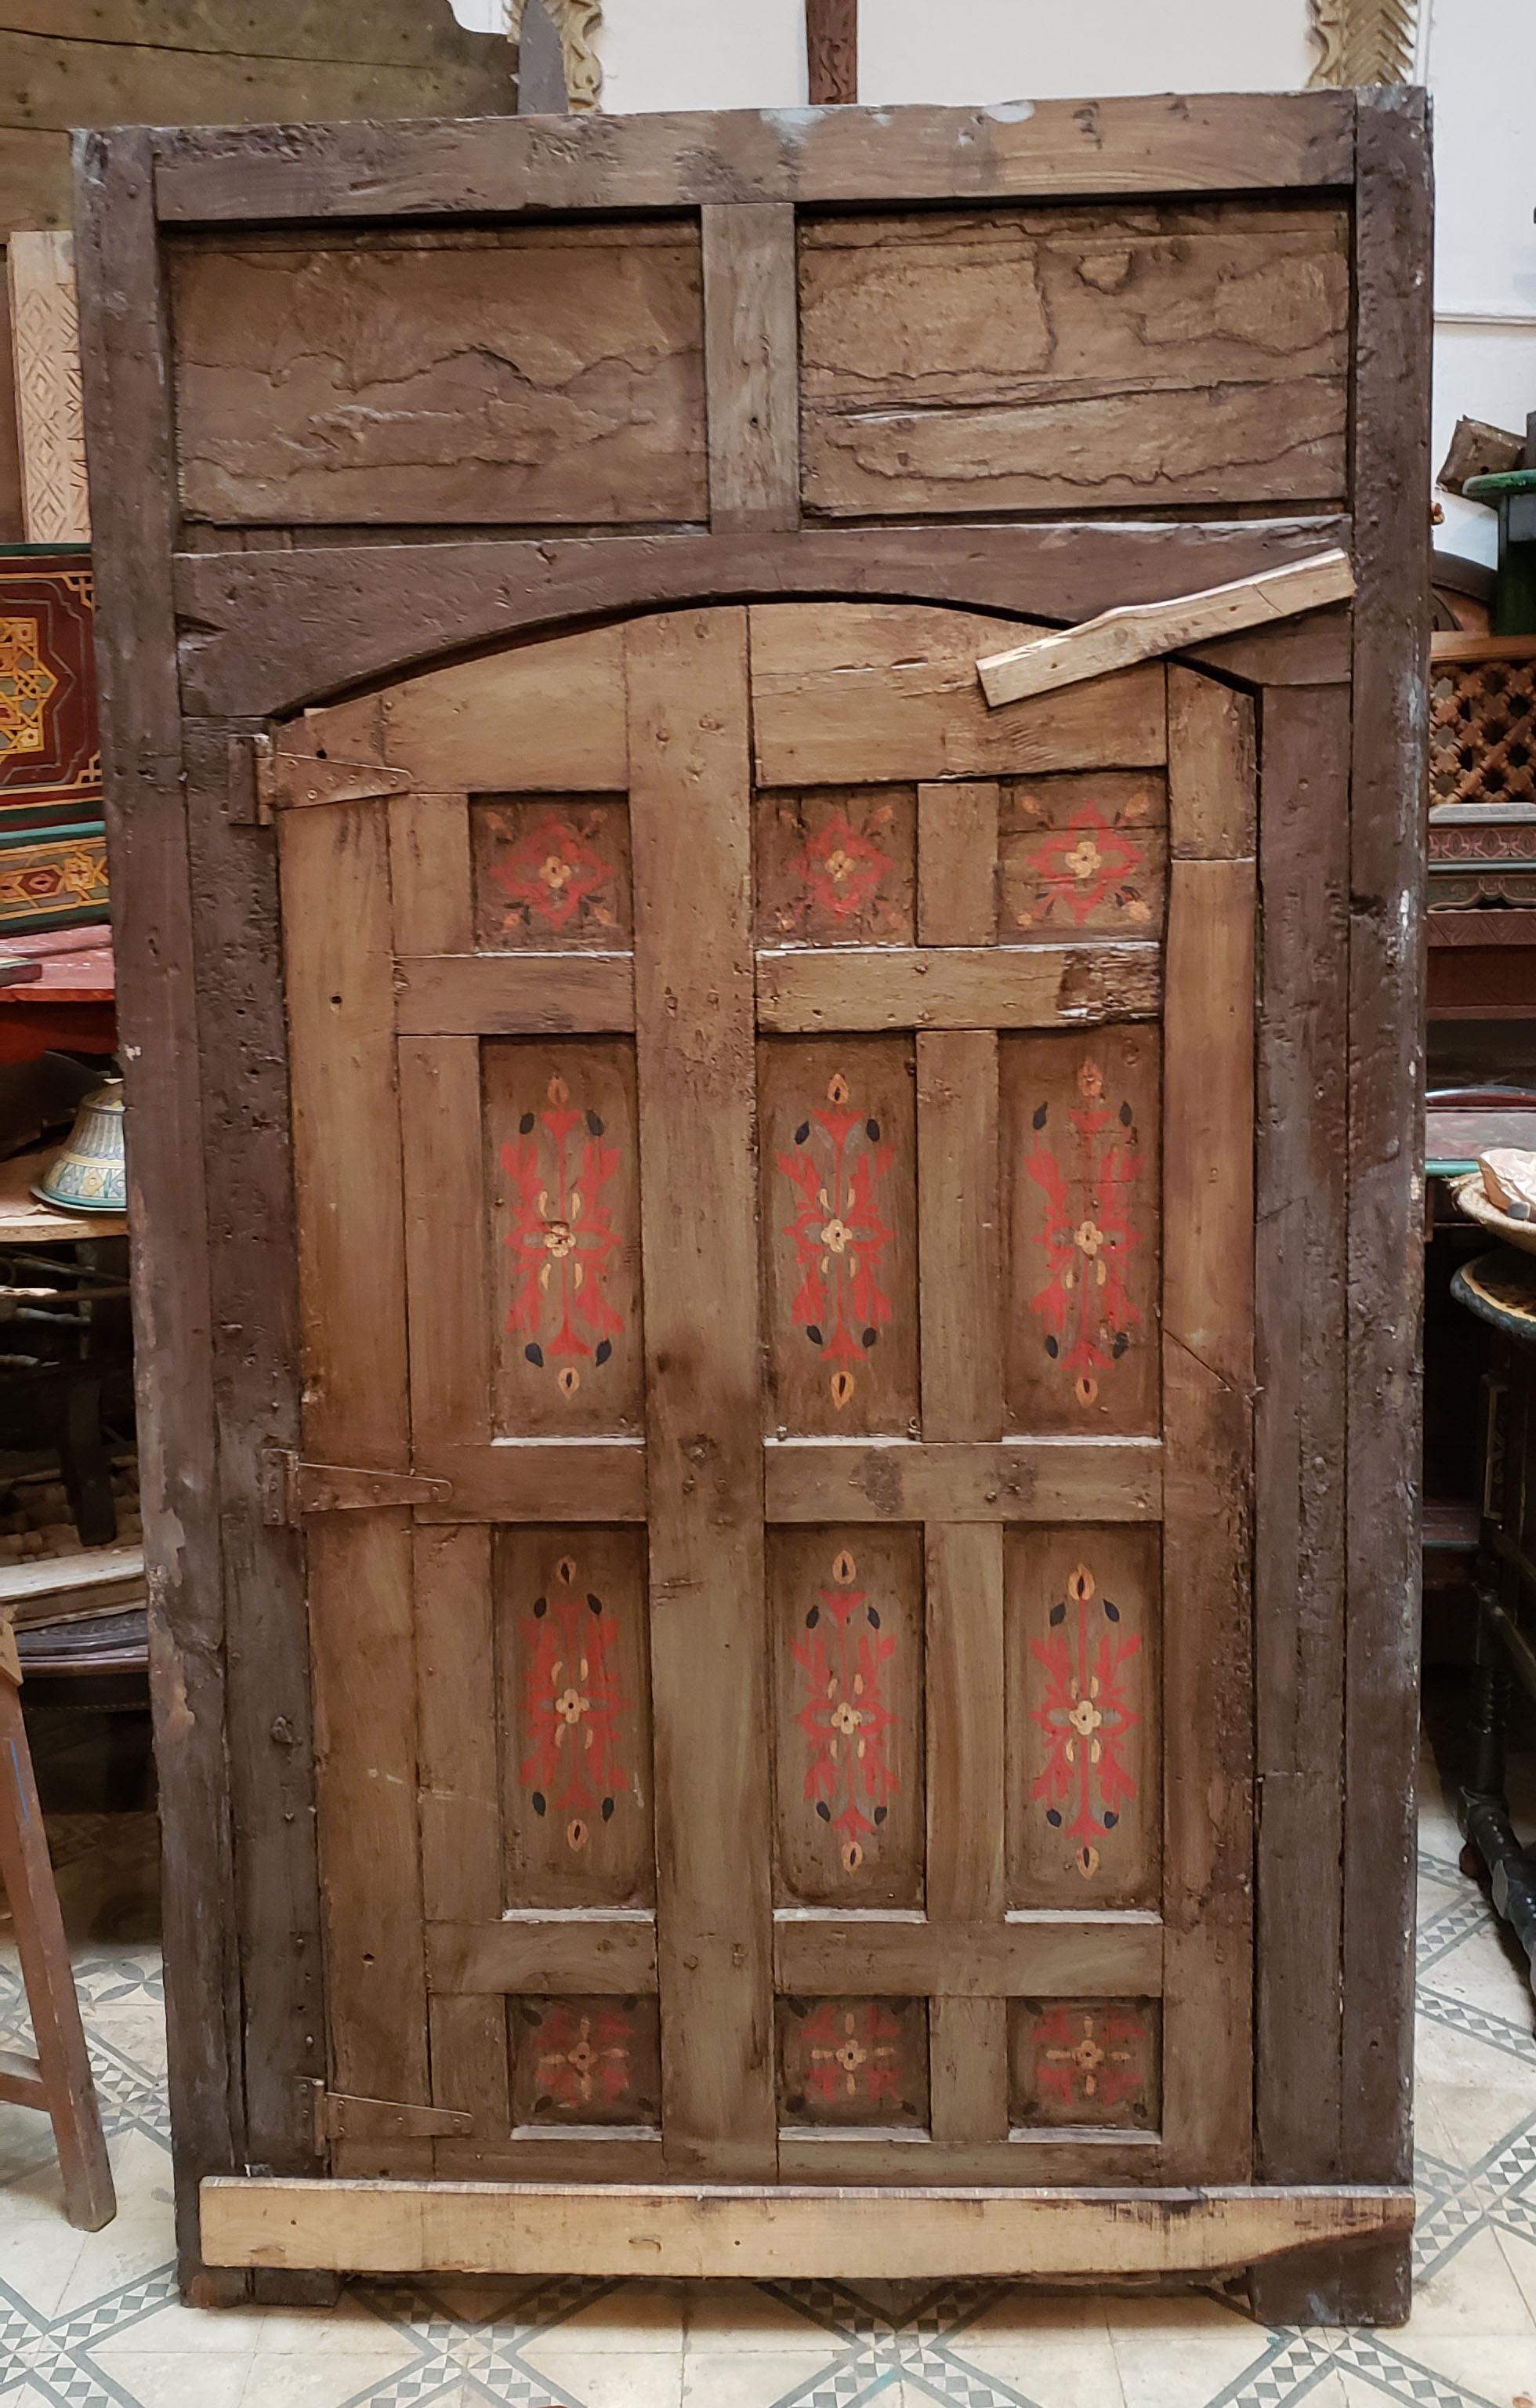 This is a beautiful single panel Moroccan door measuring approximately 79.5